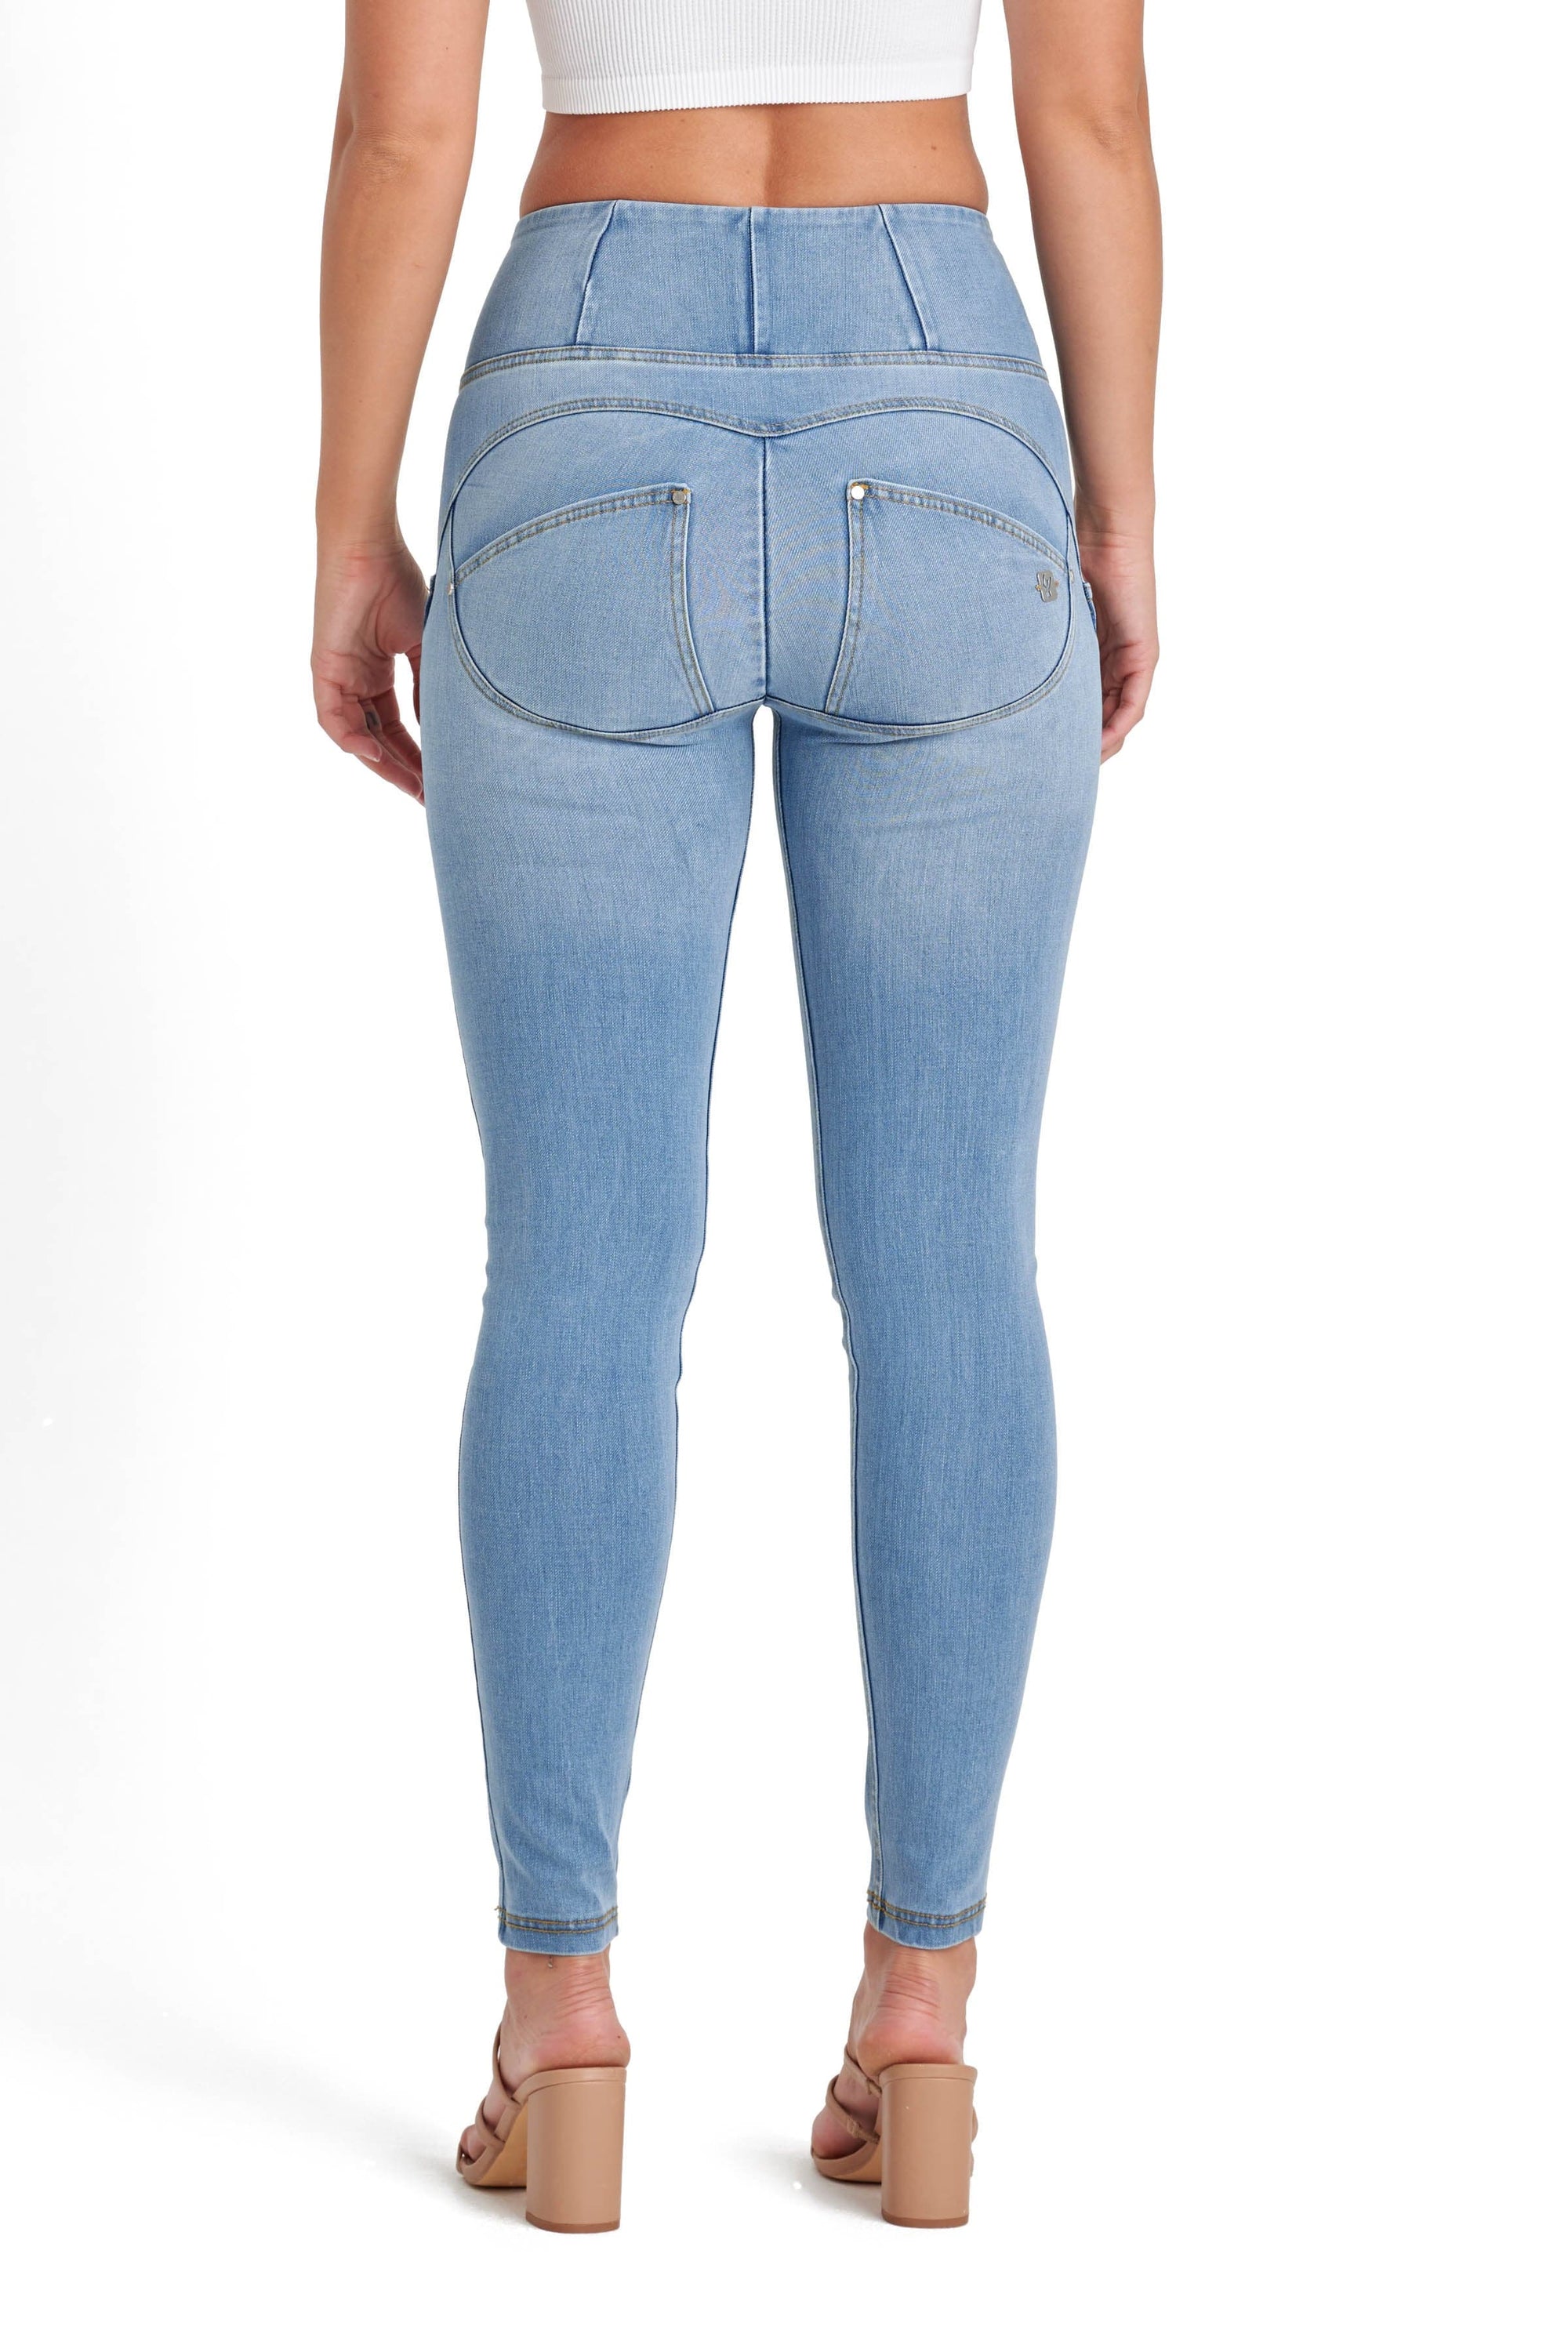 WR.UP® Snug Jeans - High Waisted - Full Length - Light Blue + Yellow Stitching 8